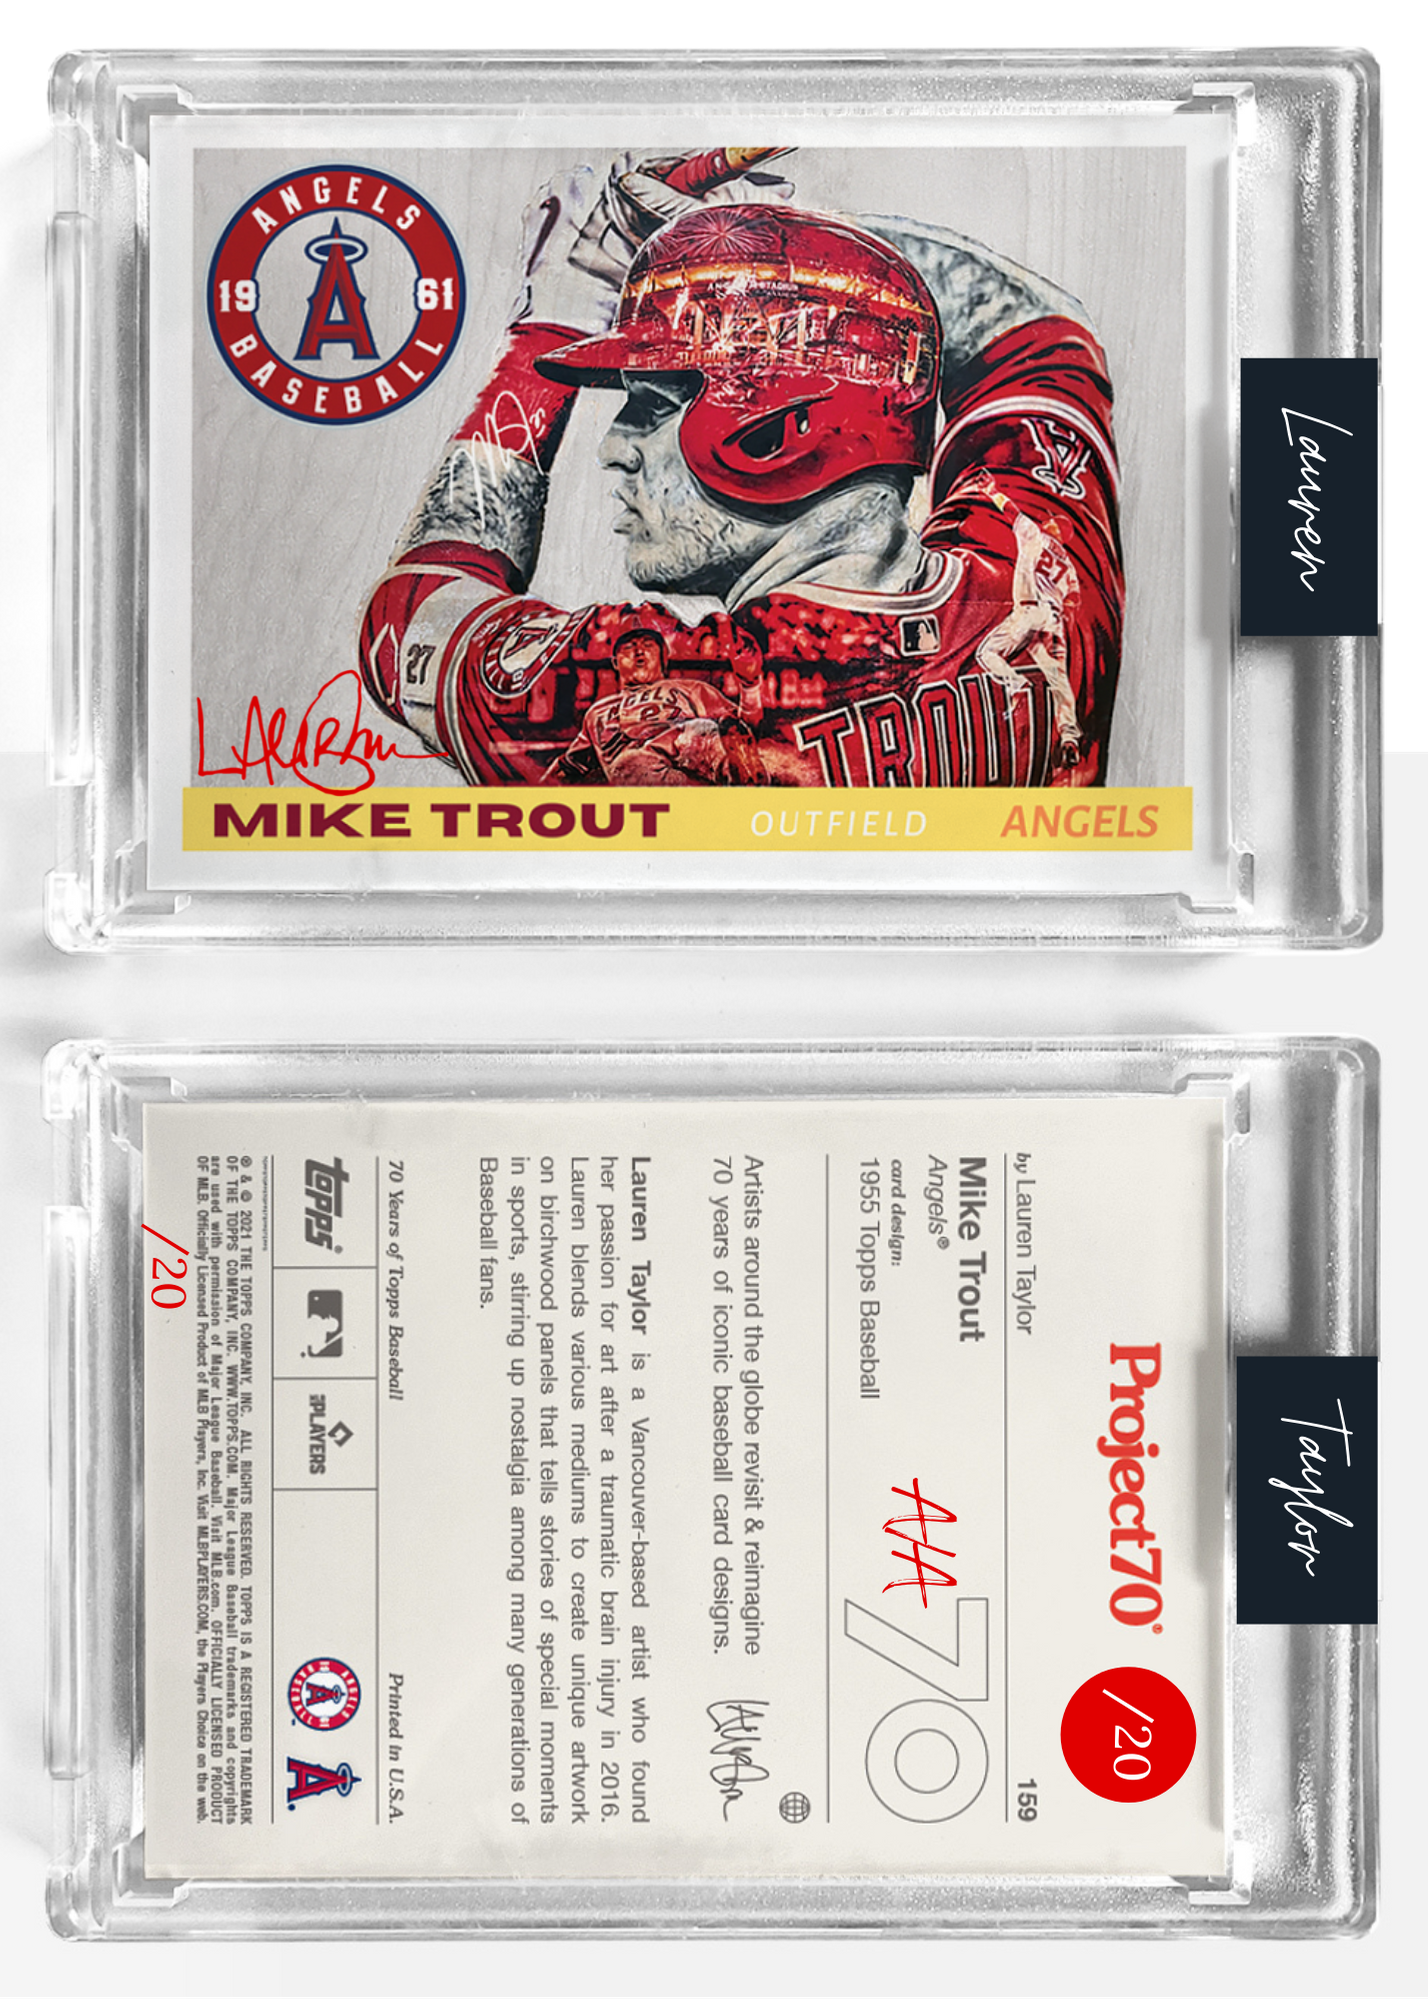 /20 Red Artist Signature - Topps Project 70 130pt card #159 by Lauren Taylor - Mike Trout